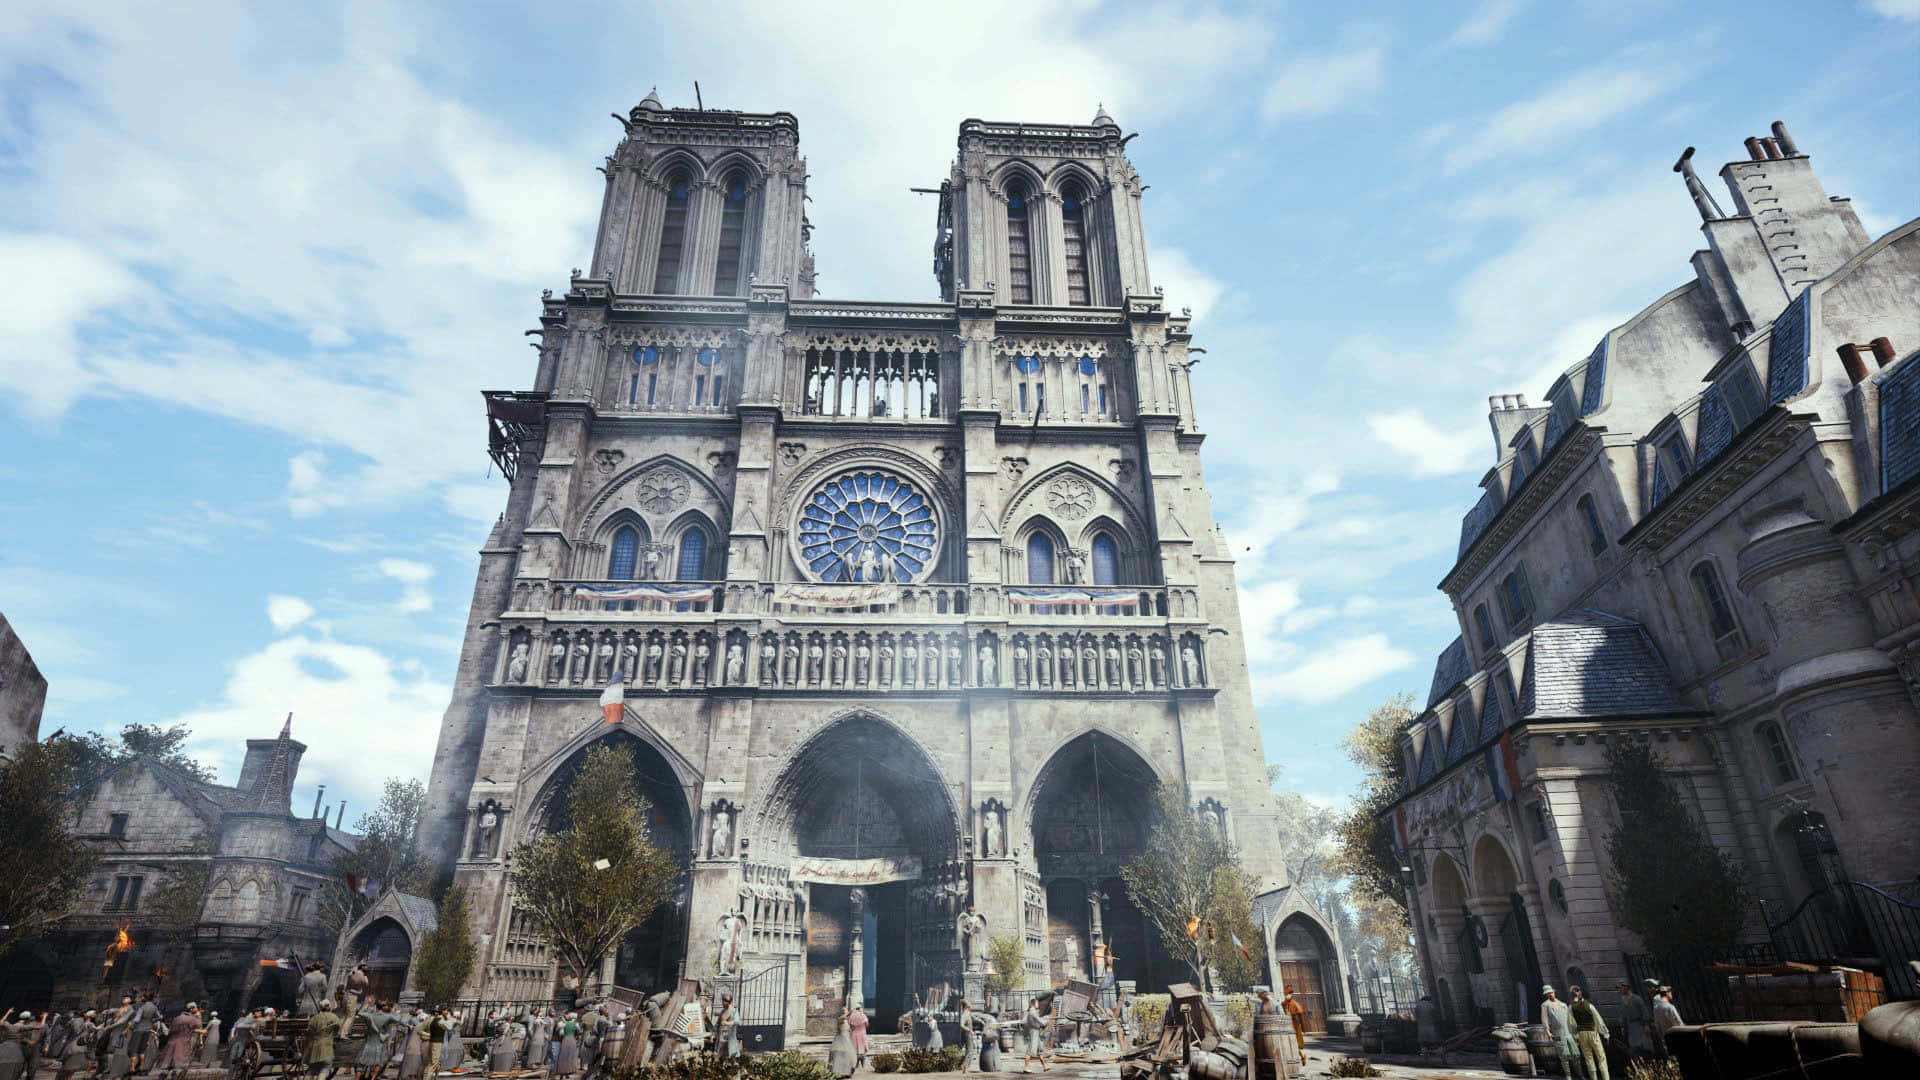 Notredame Cathedral In Assassin's Creed - La Cattedrale Di Notre Dame In Assassin's Creed Sfondo